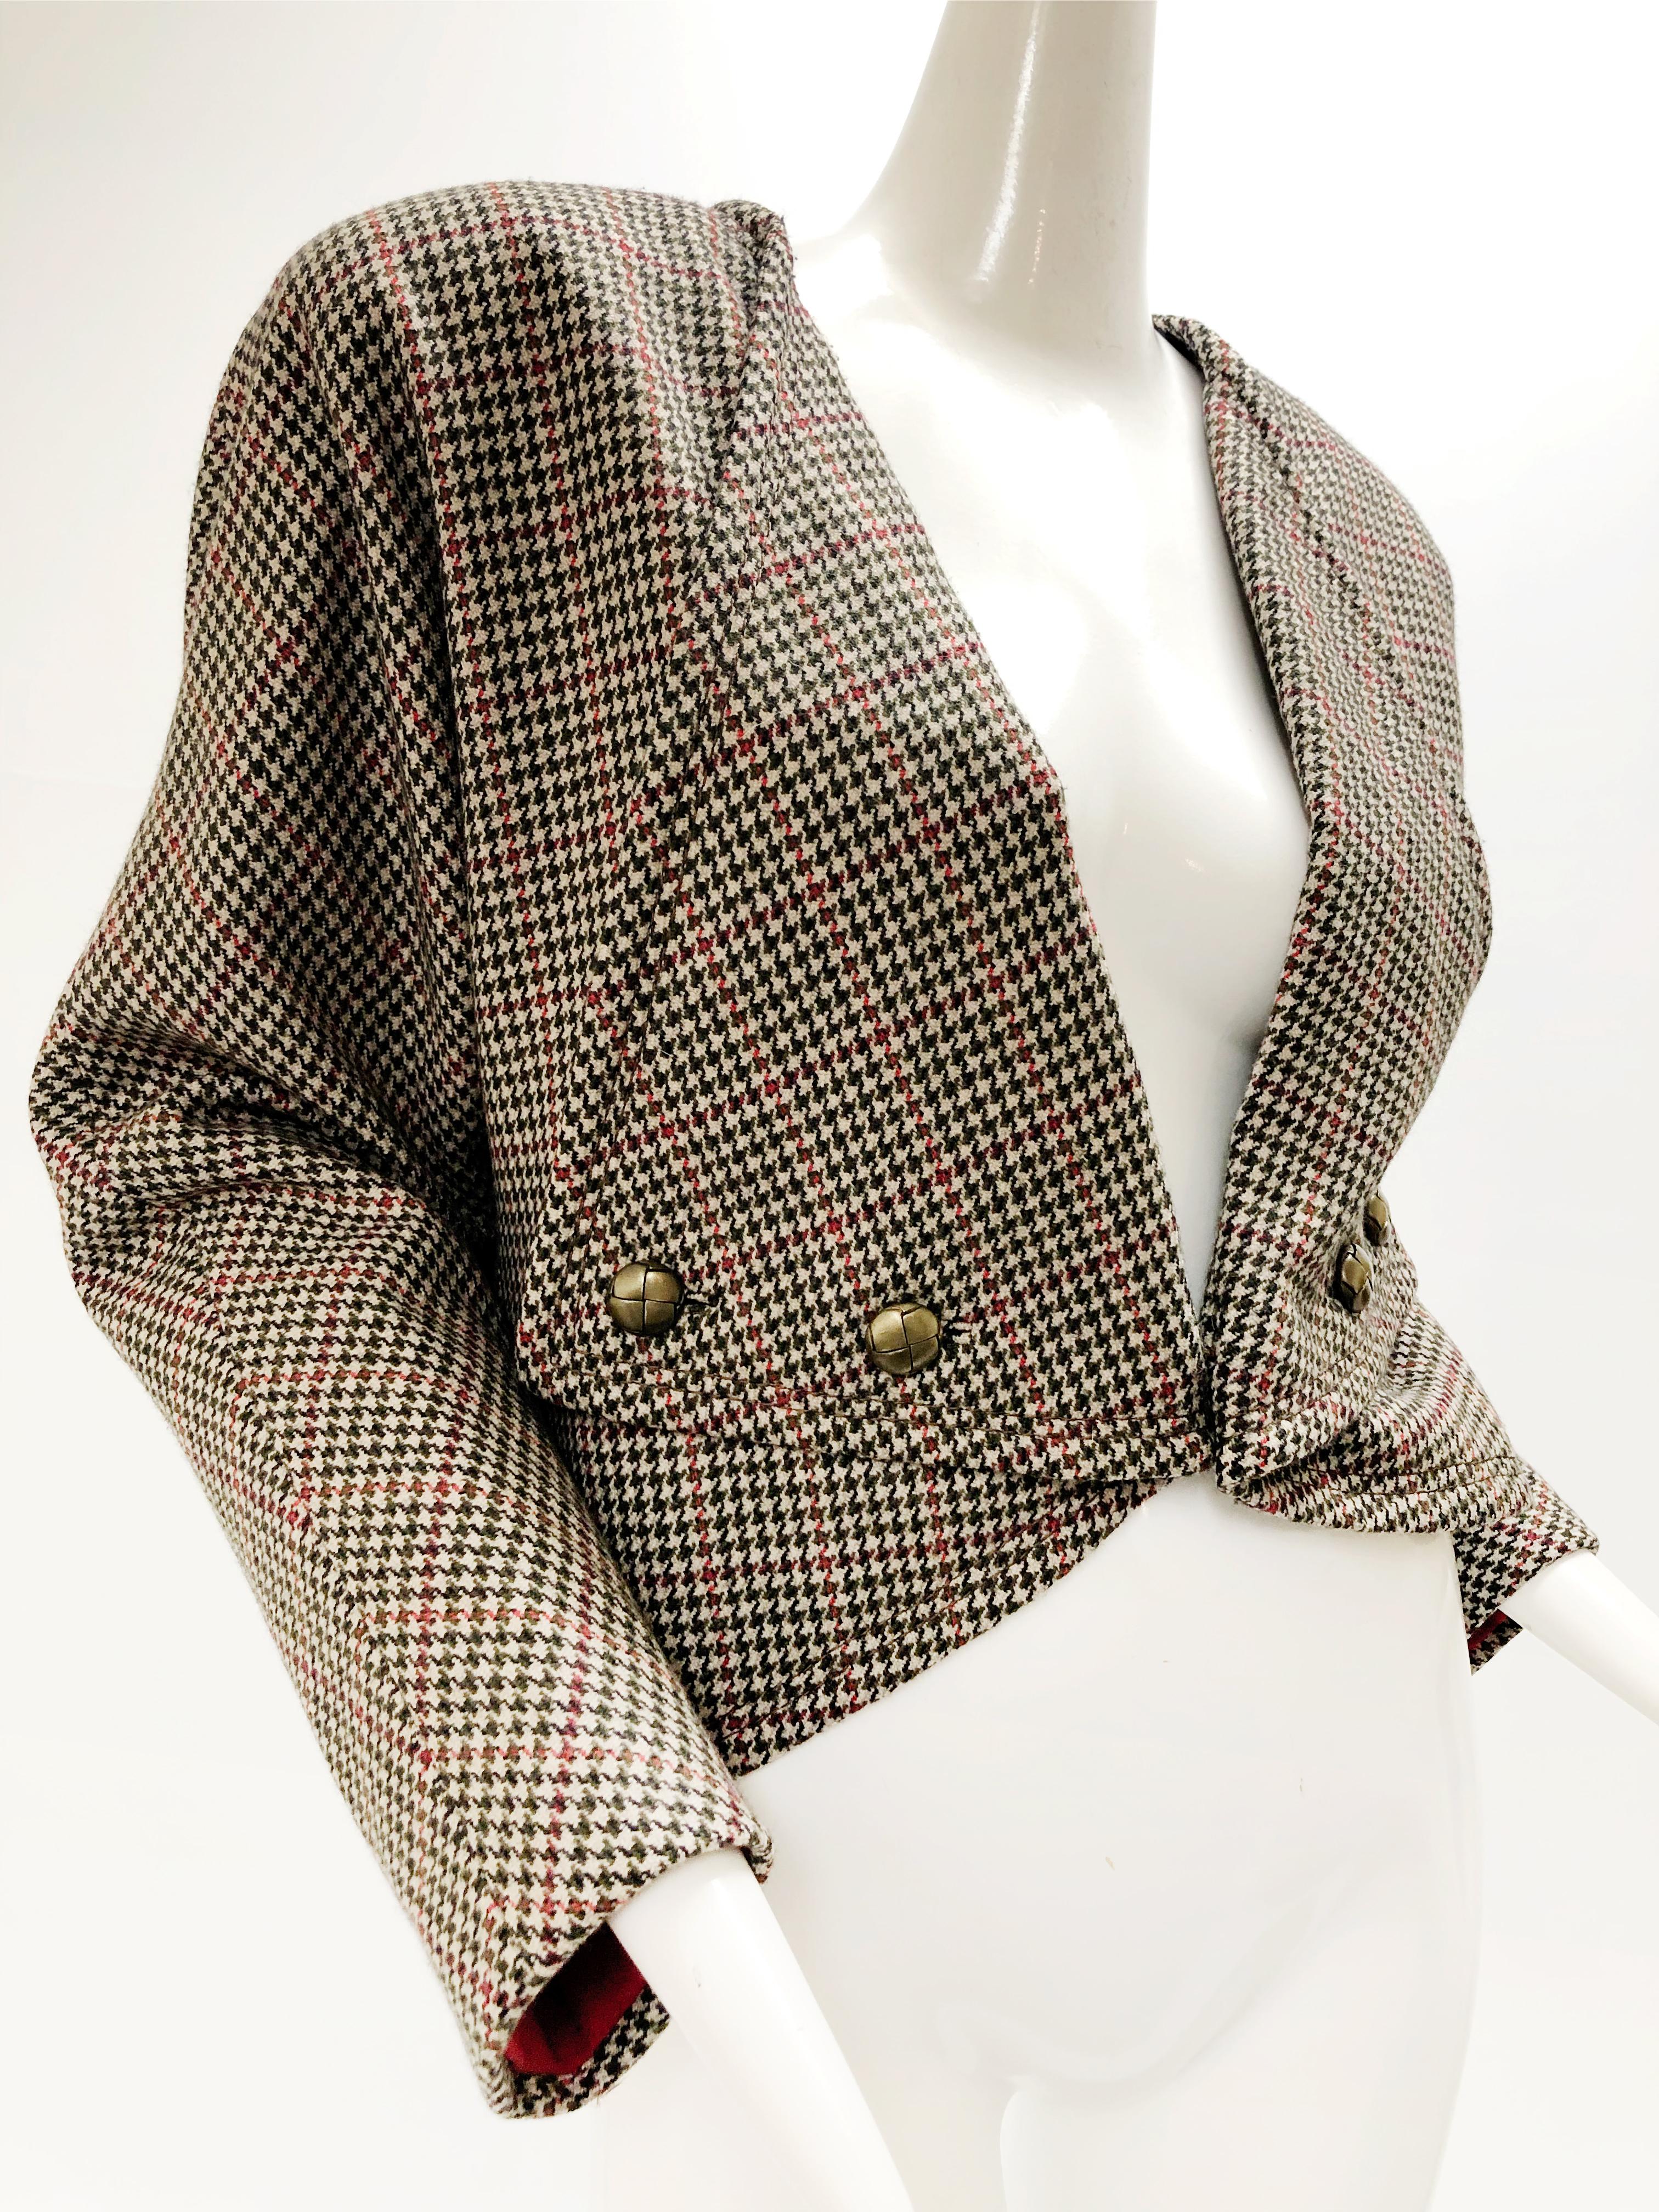 1980s Galanos Silk Dress in a Hounds Tooth Plaid W/ Matching Wool Jacket & Scarf For Sale 10